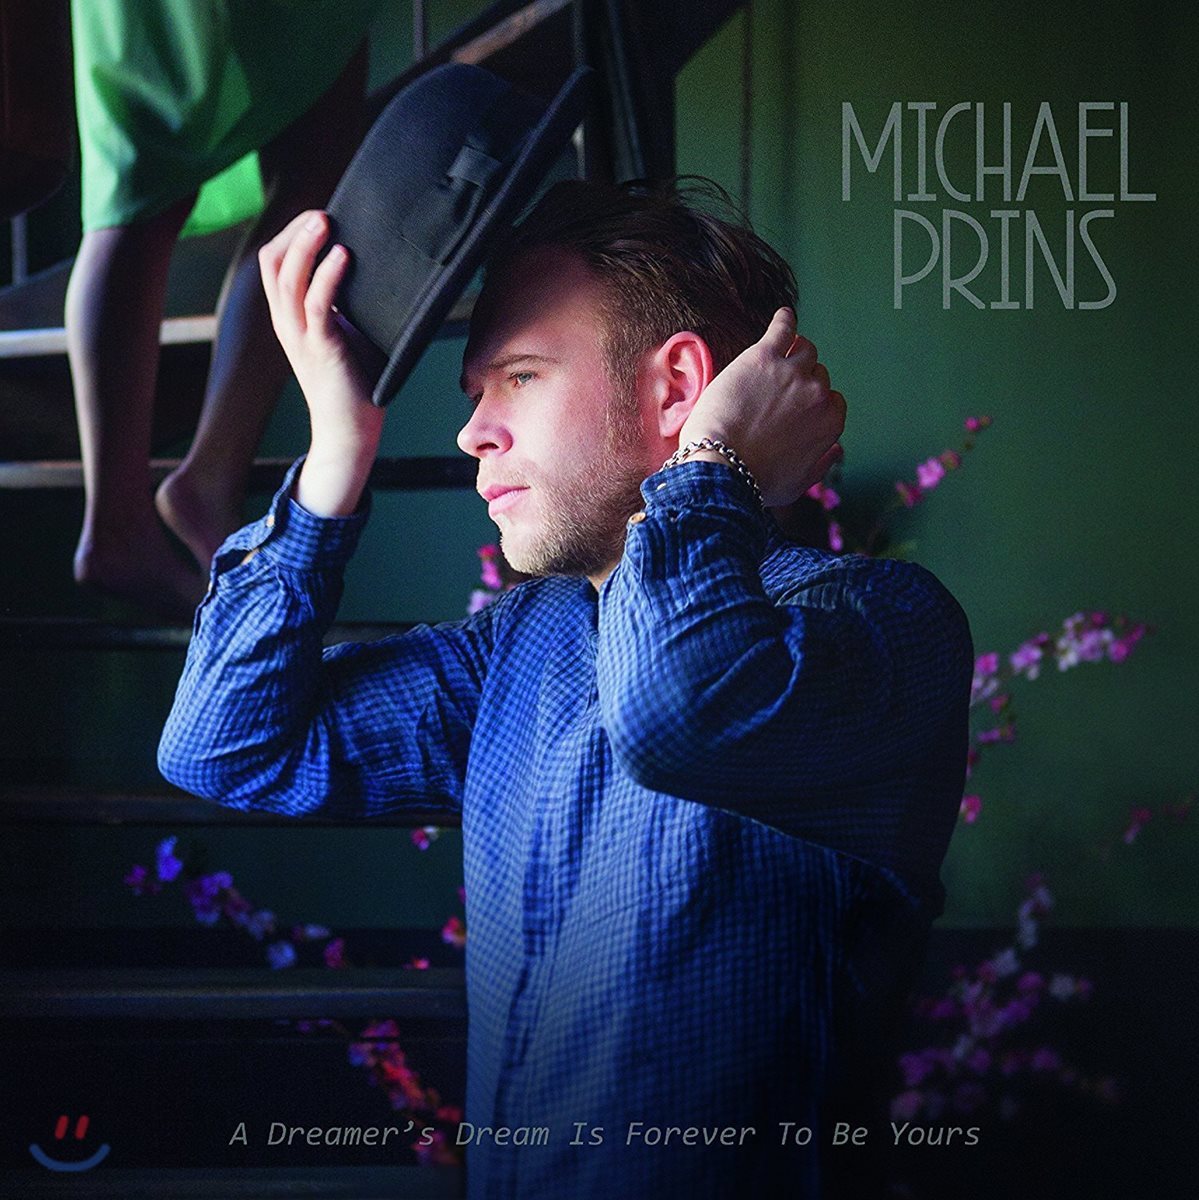 Michael Prins (마이클 프린스) - A Dreamer's Dream Is Forever To Be Yours [LP]